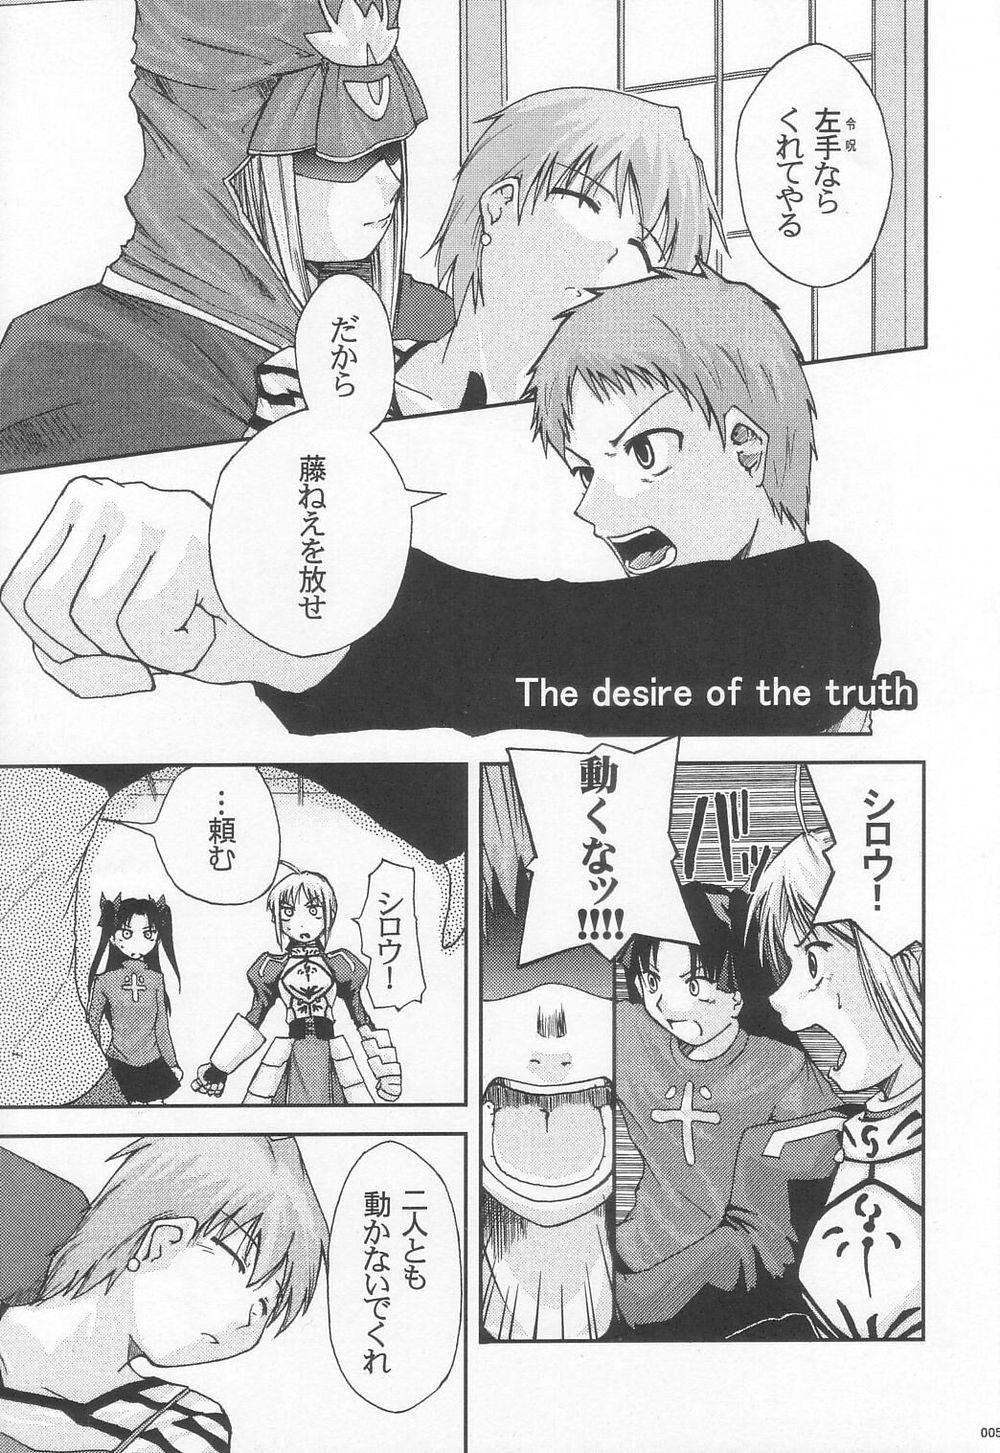 Porno Amateur The desire of the truth - Fate stay night Spanish - Page 4